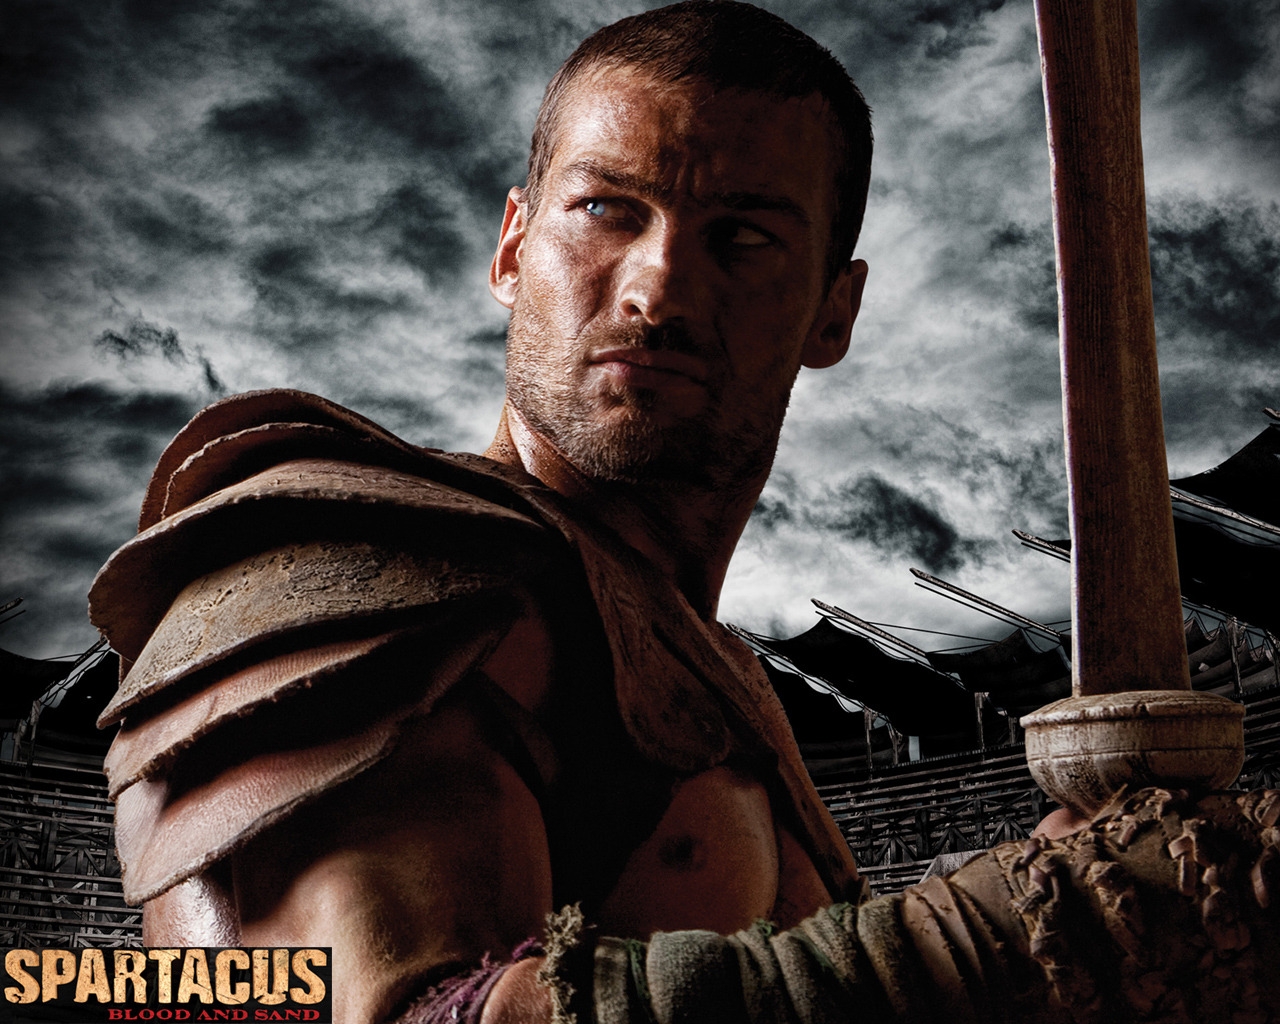 Spartacus Blood and Sand Season for 1280 x 1024 resolution